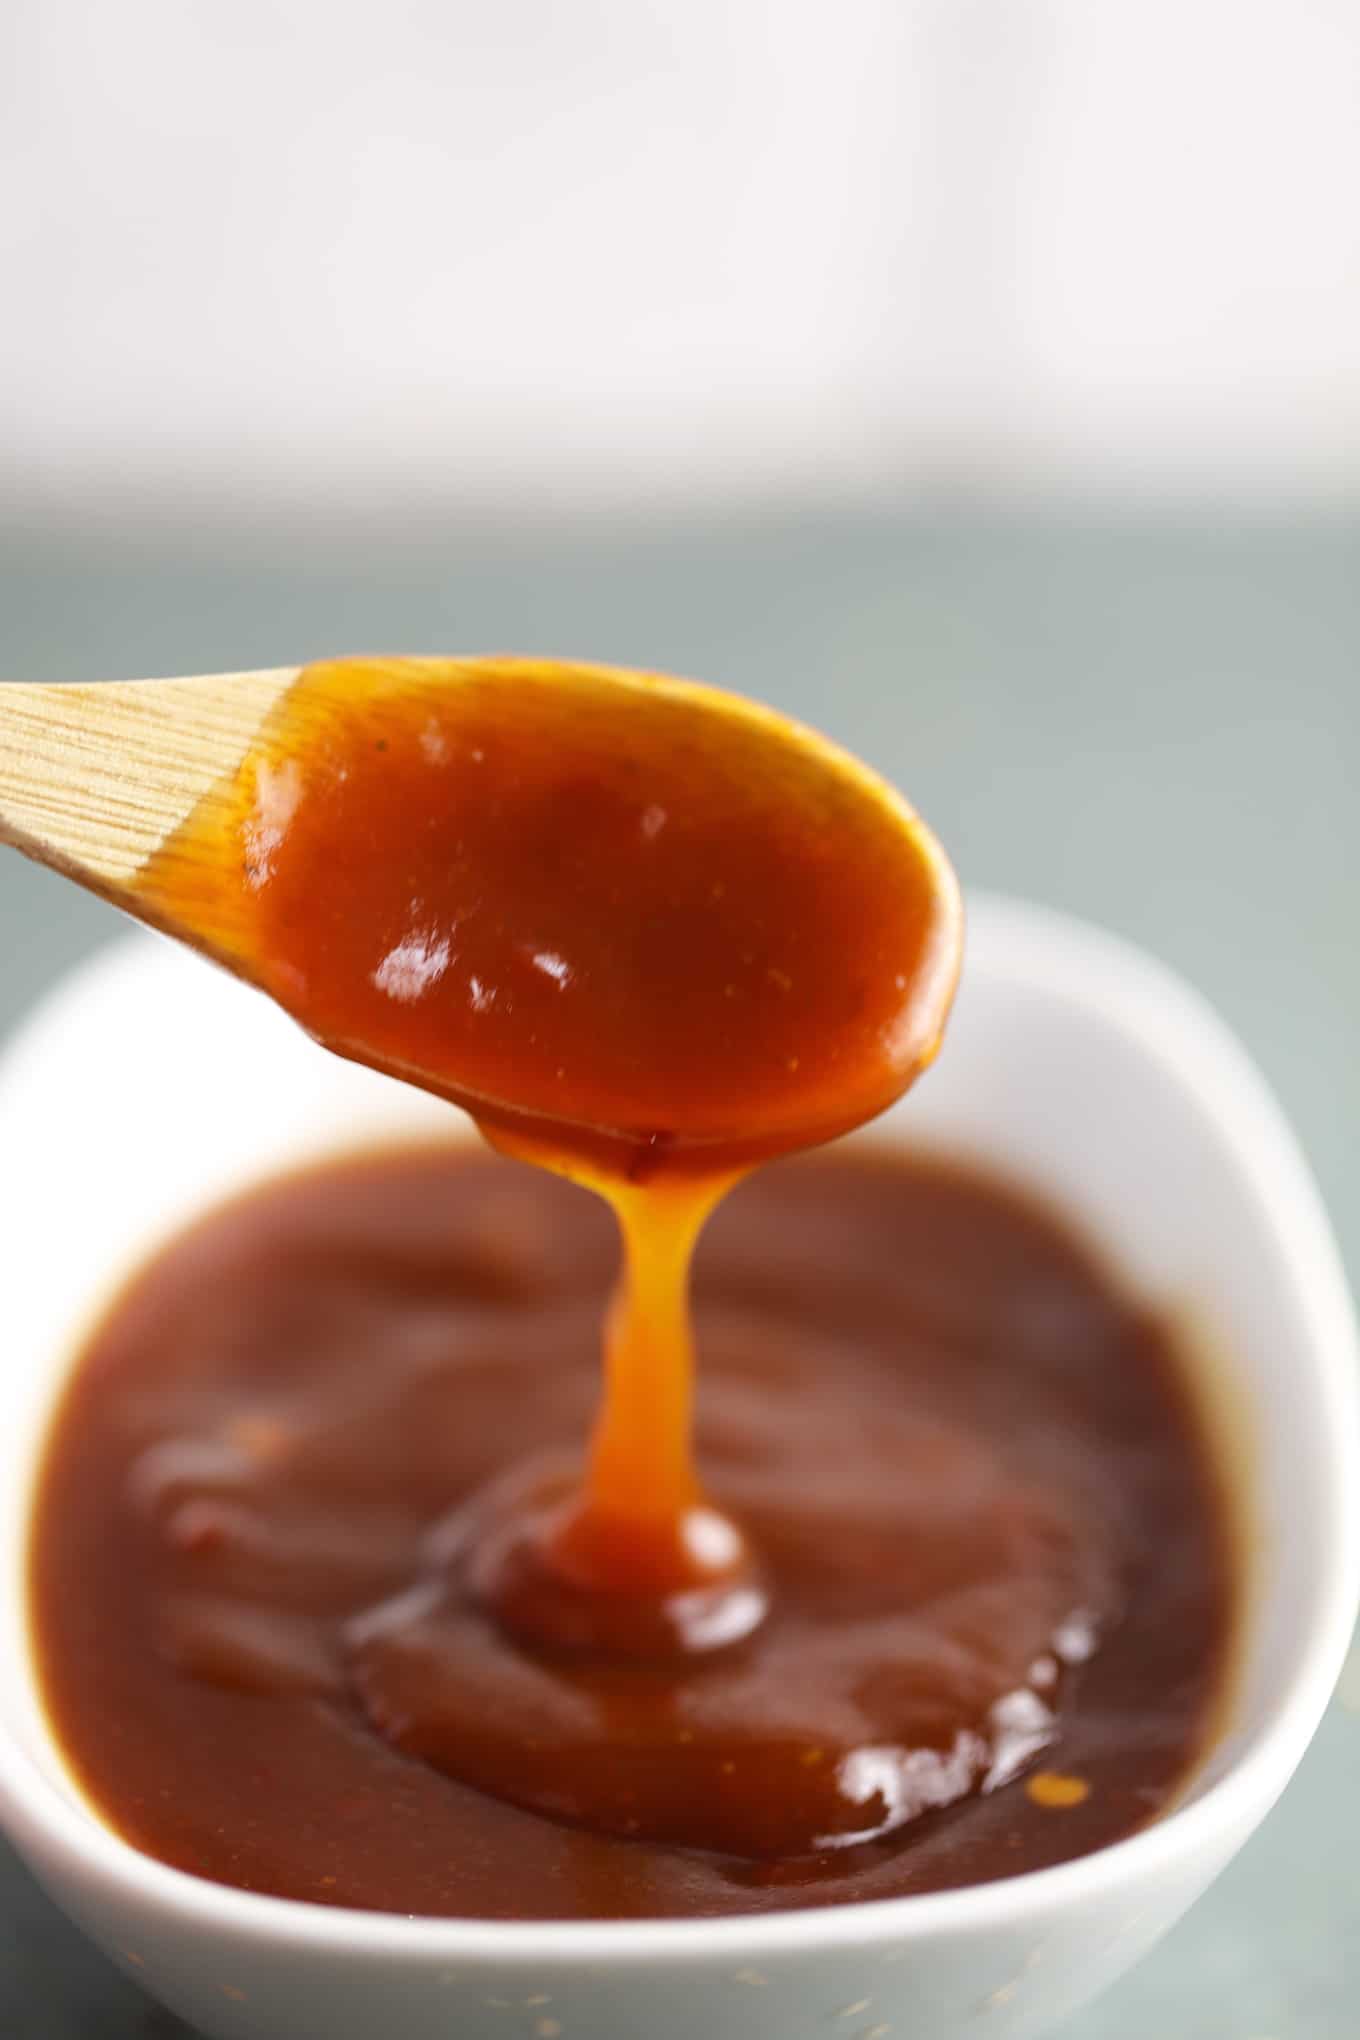 A spoon of General Tso's sauce